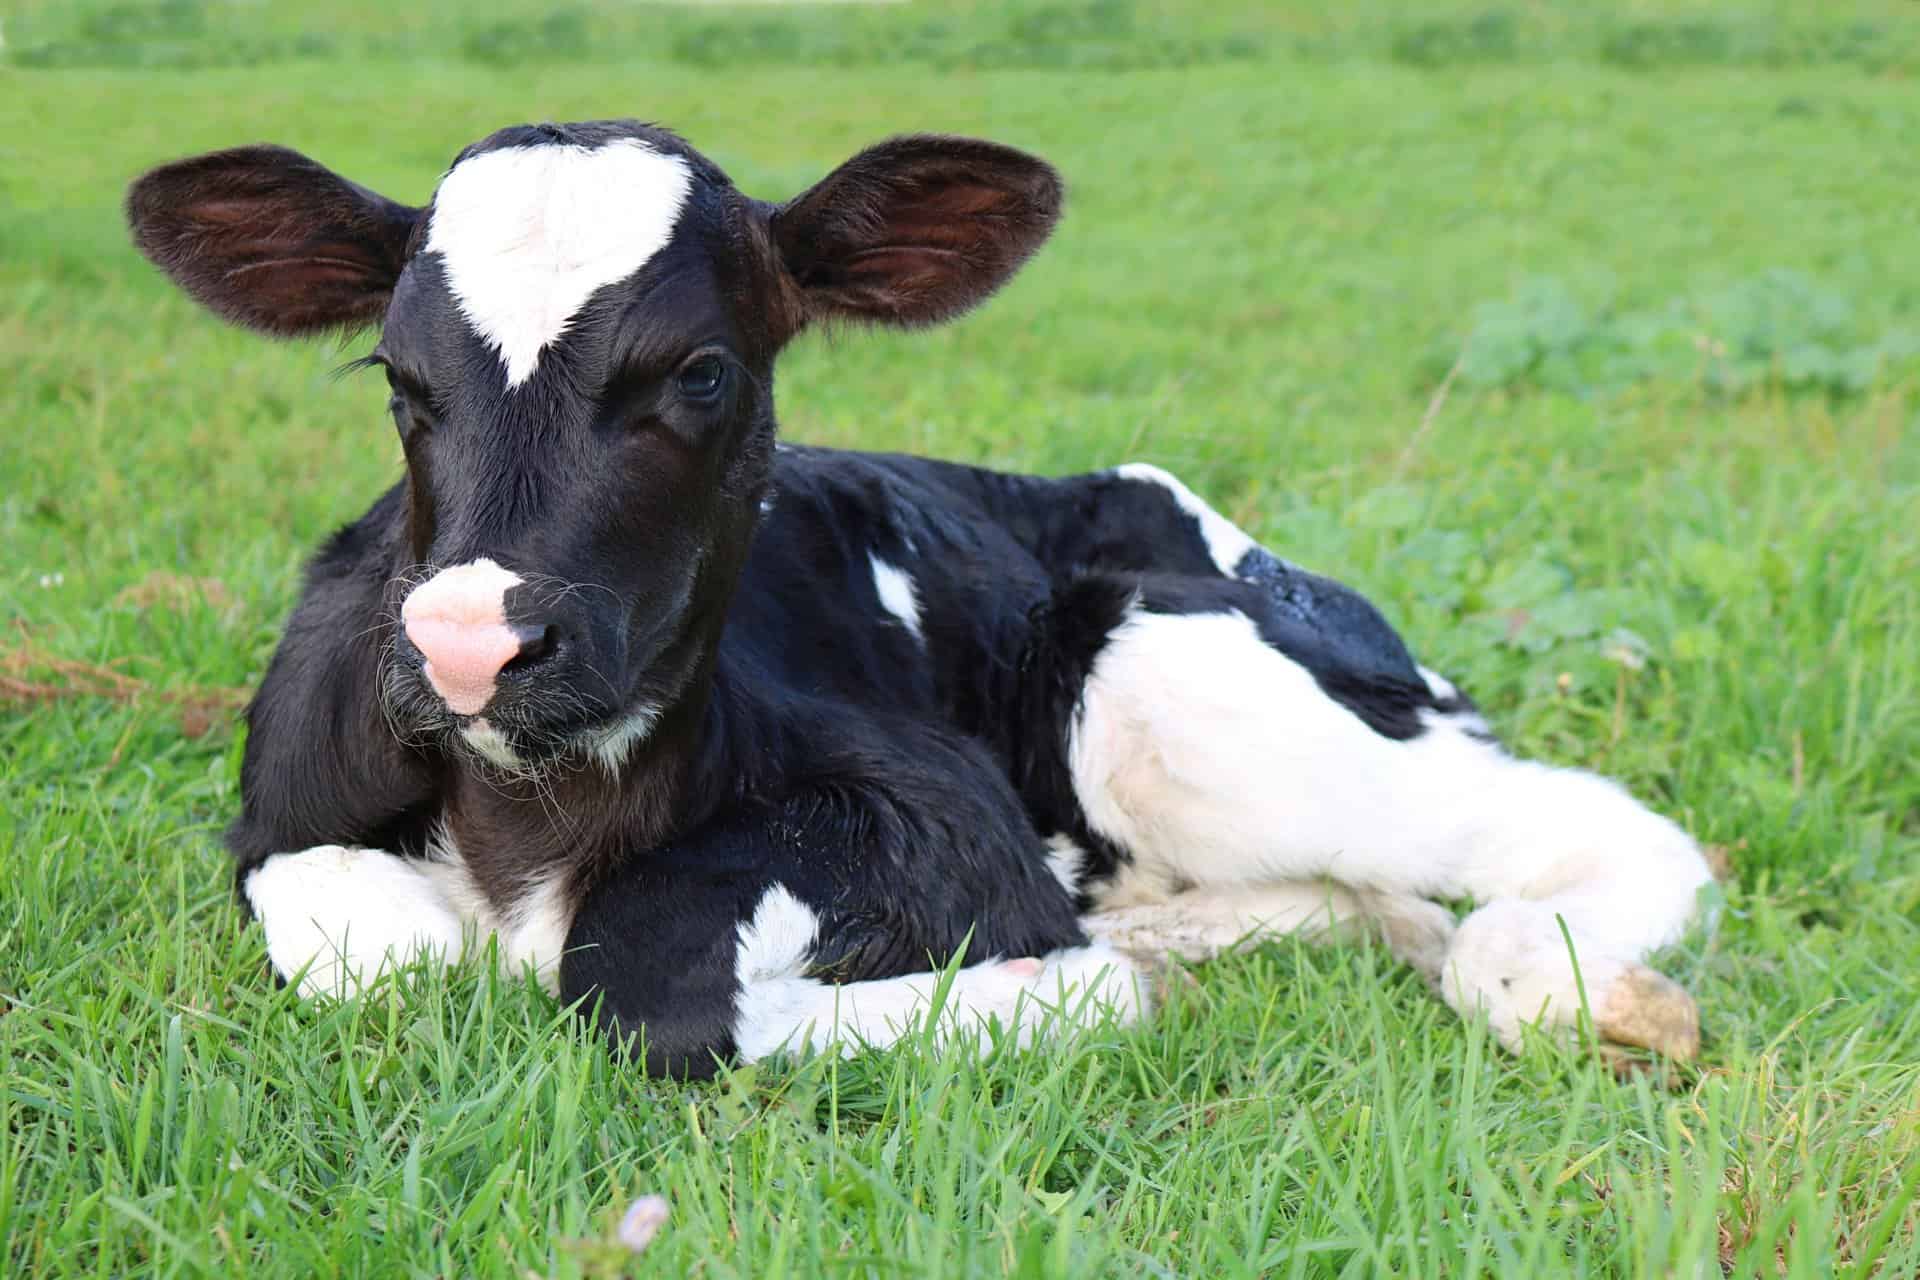 Test for success – measuring immune transfer in calves after colostrum feeding gives us insight into herd health opportunities